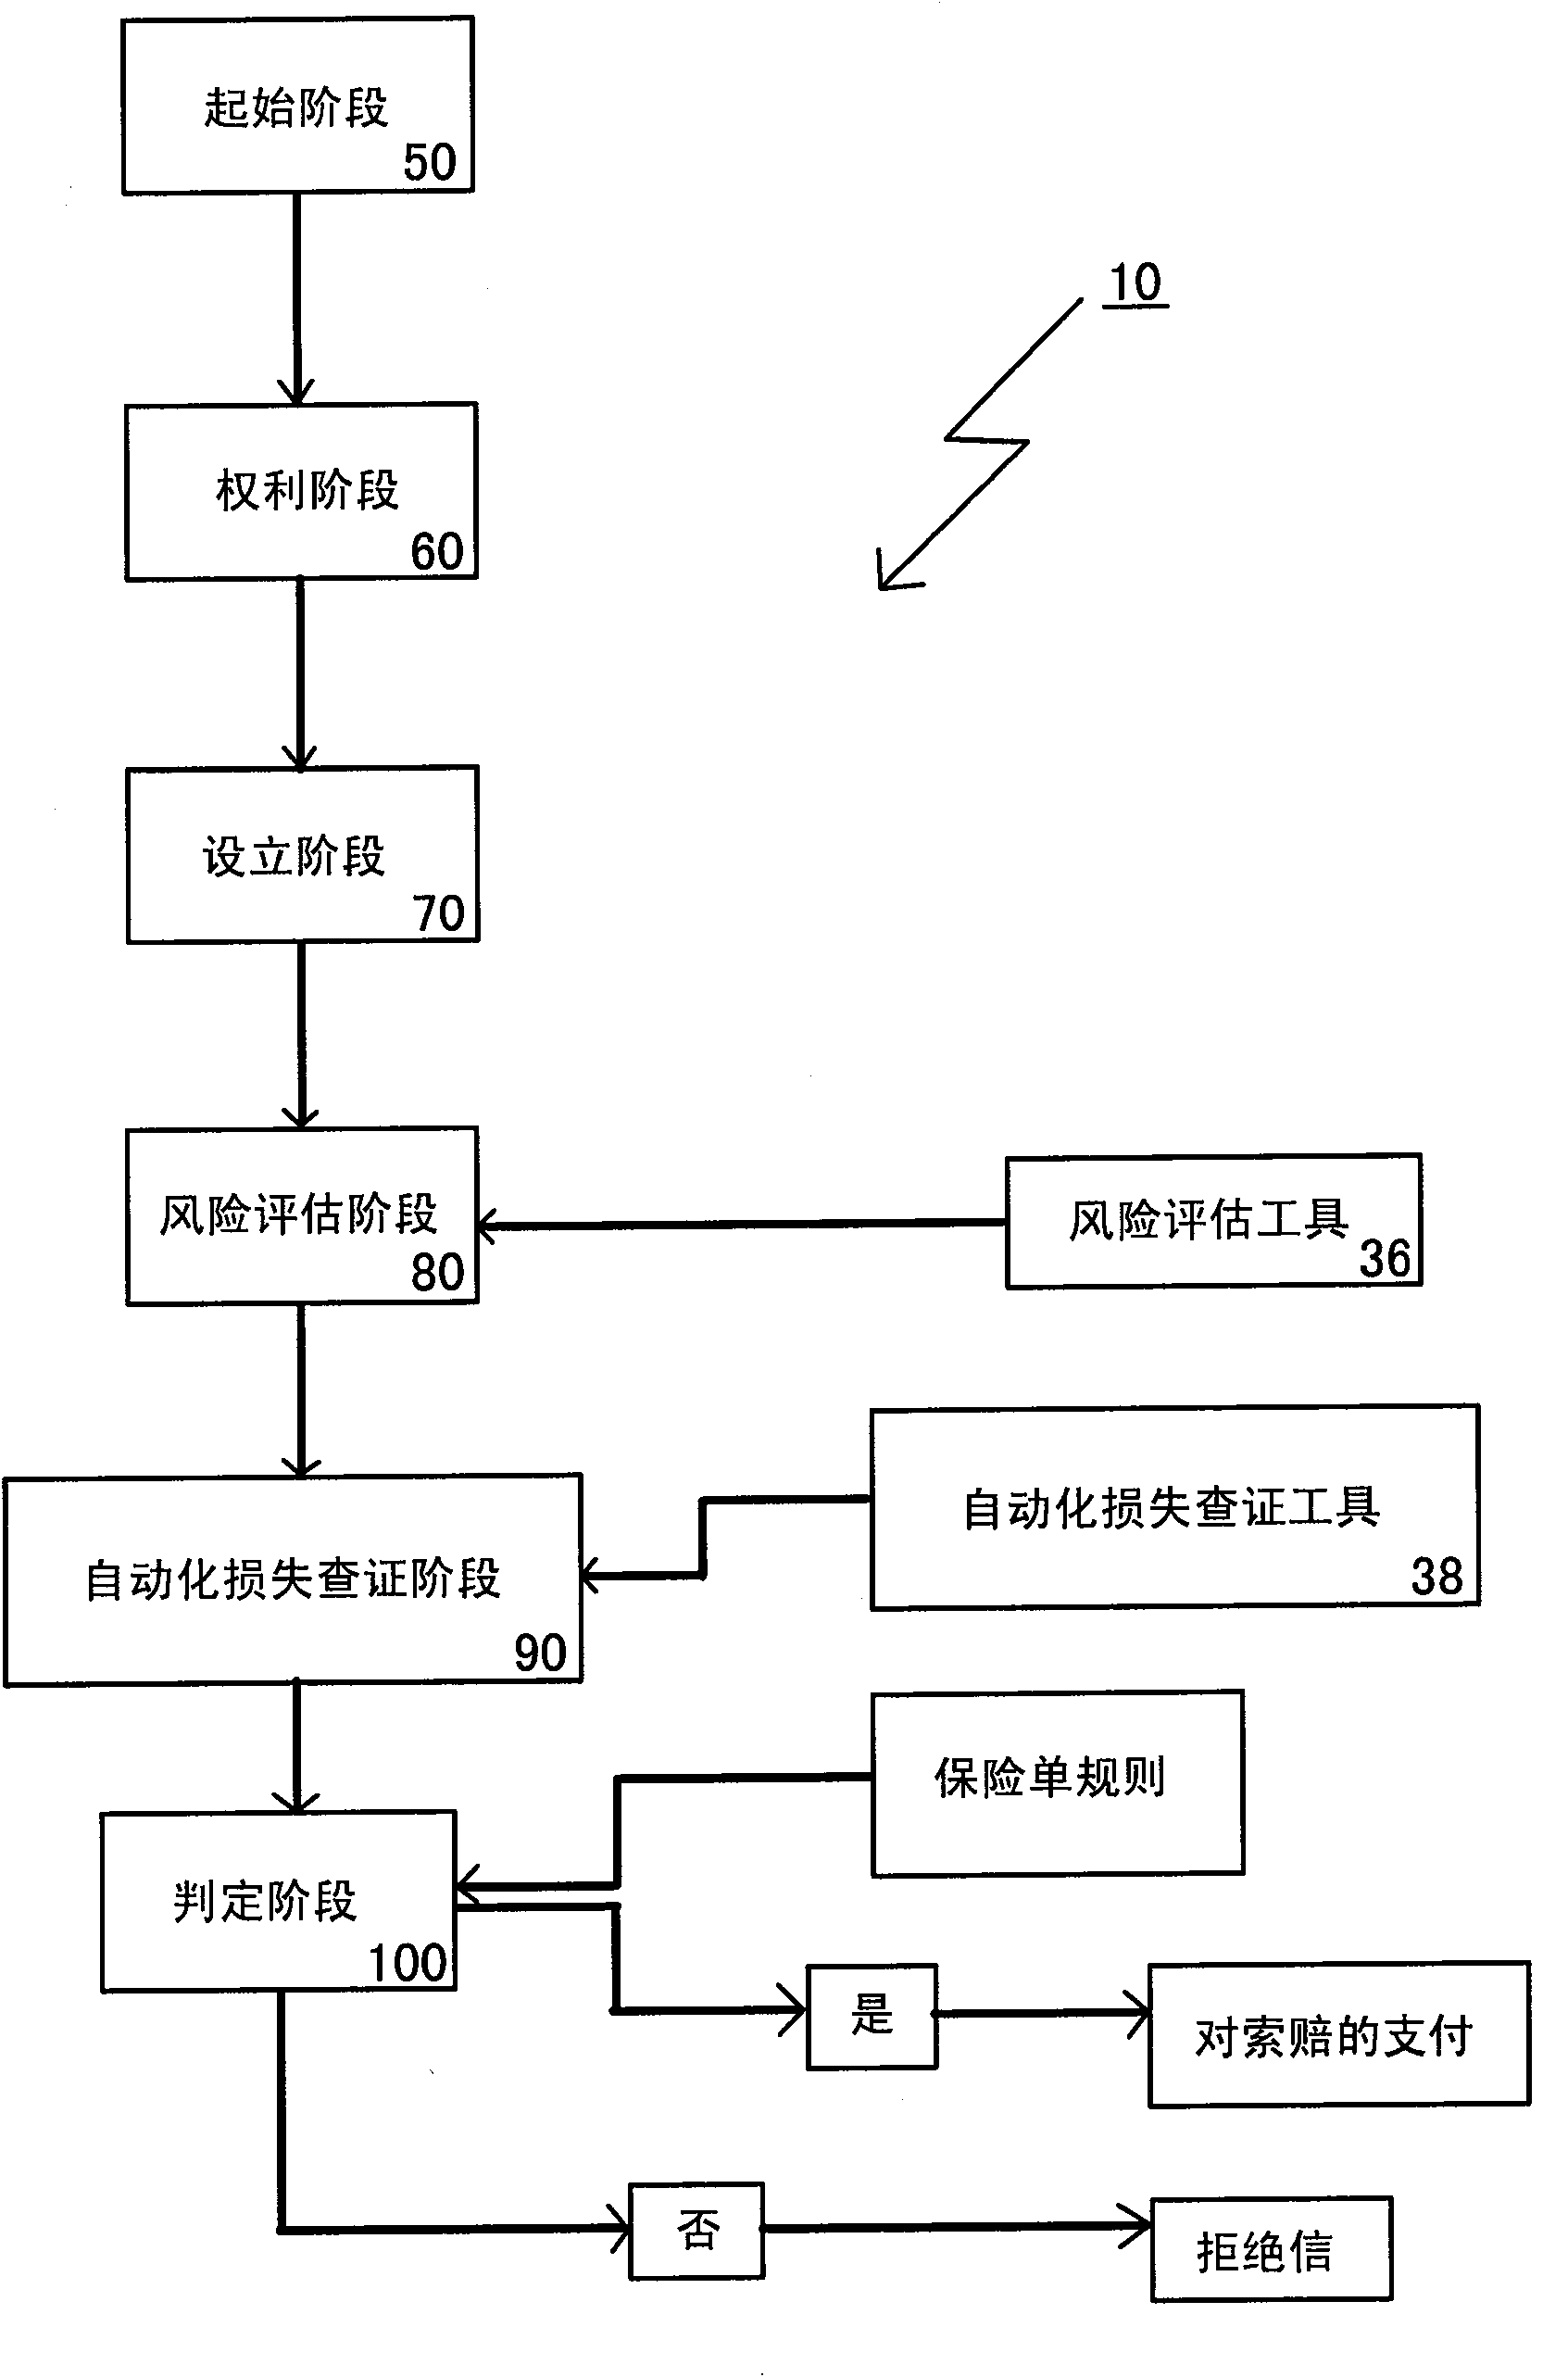 Automated claims processing system